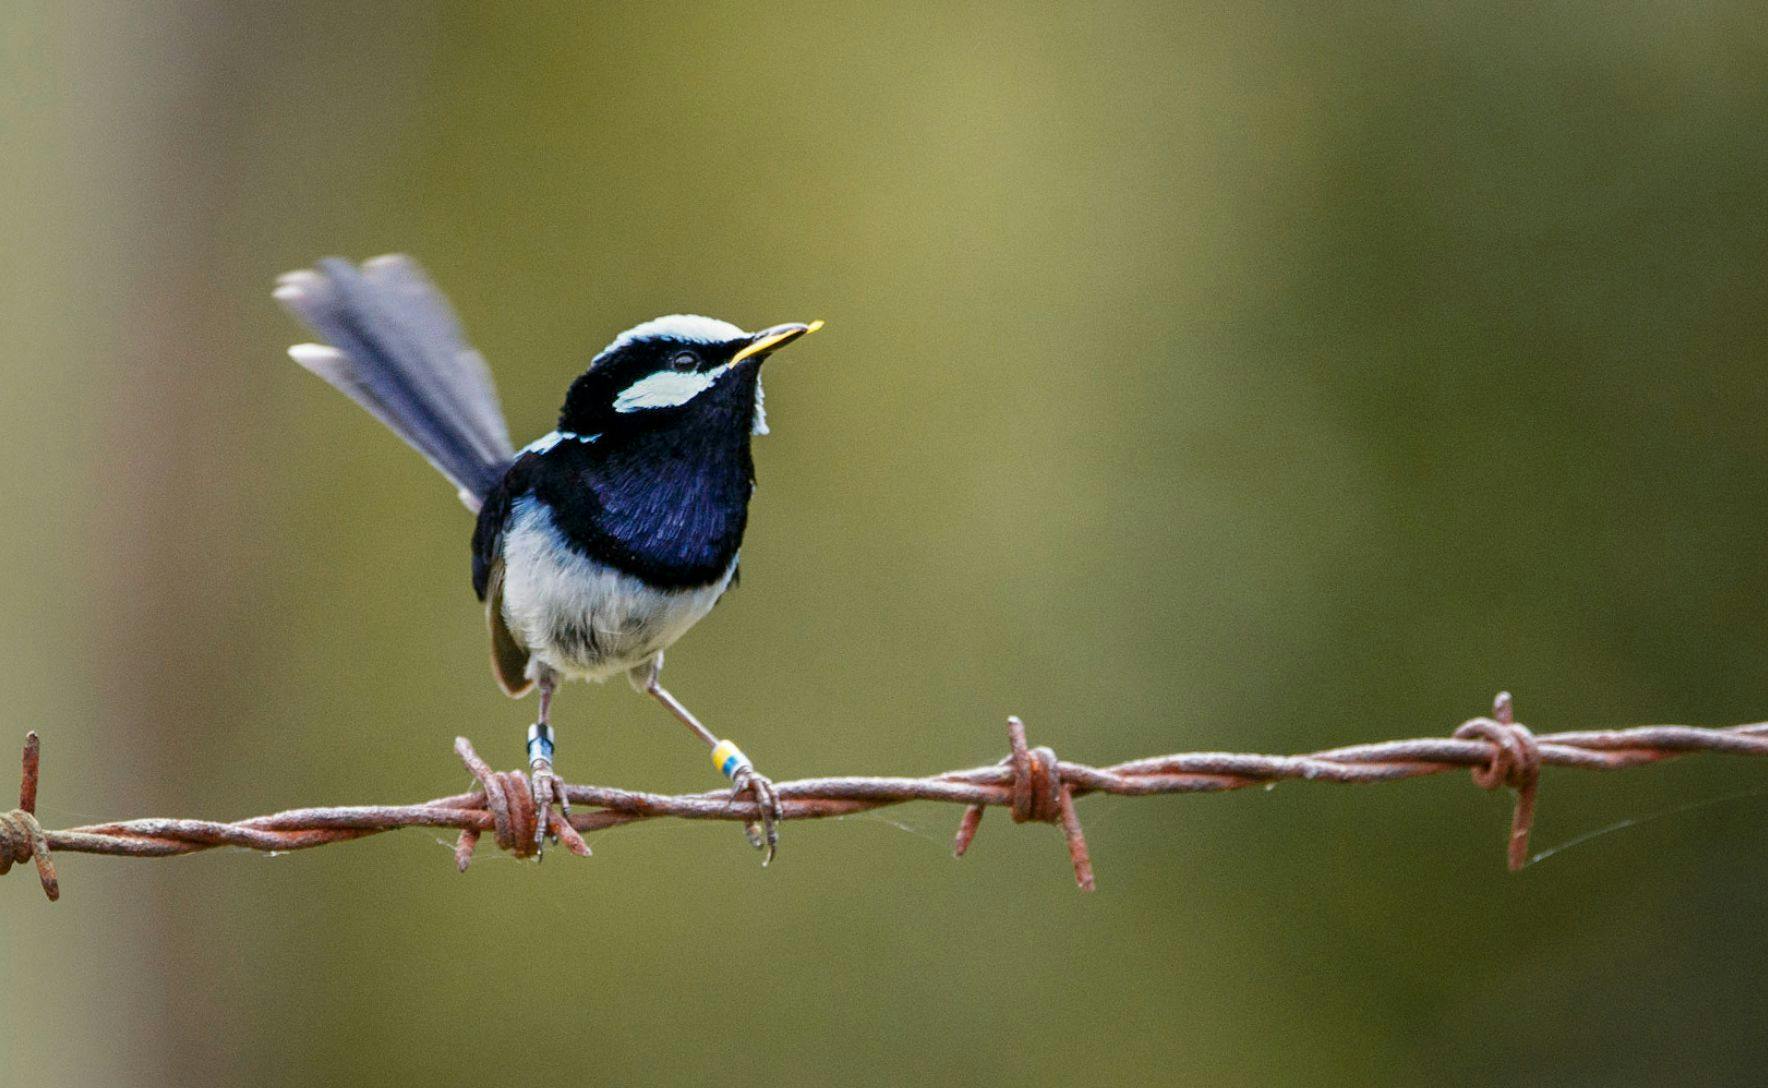 A male superb fairy wren is perched on a barbed wire fence.